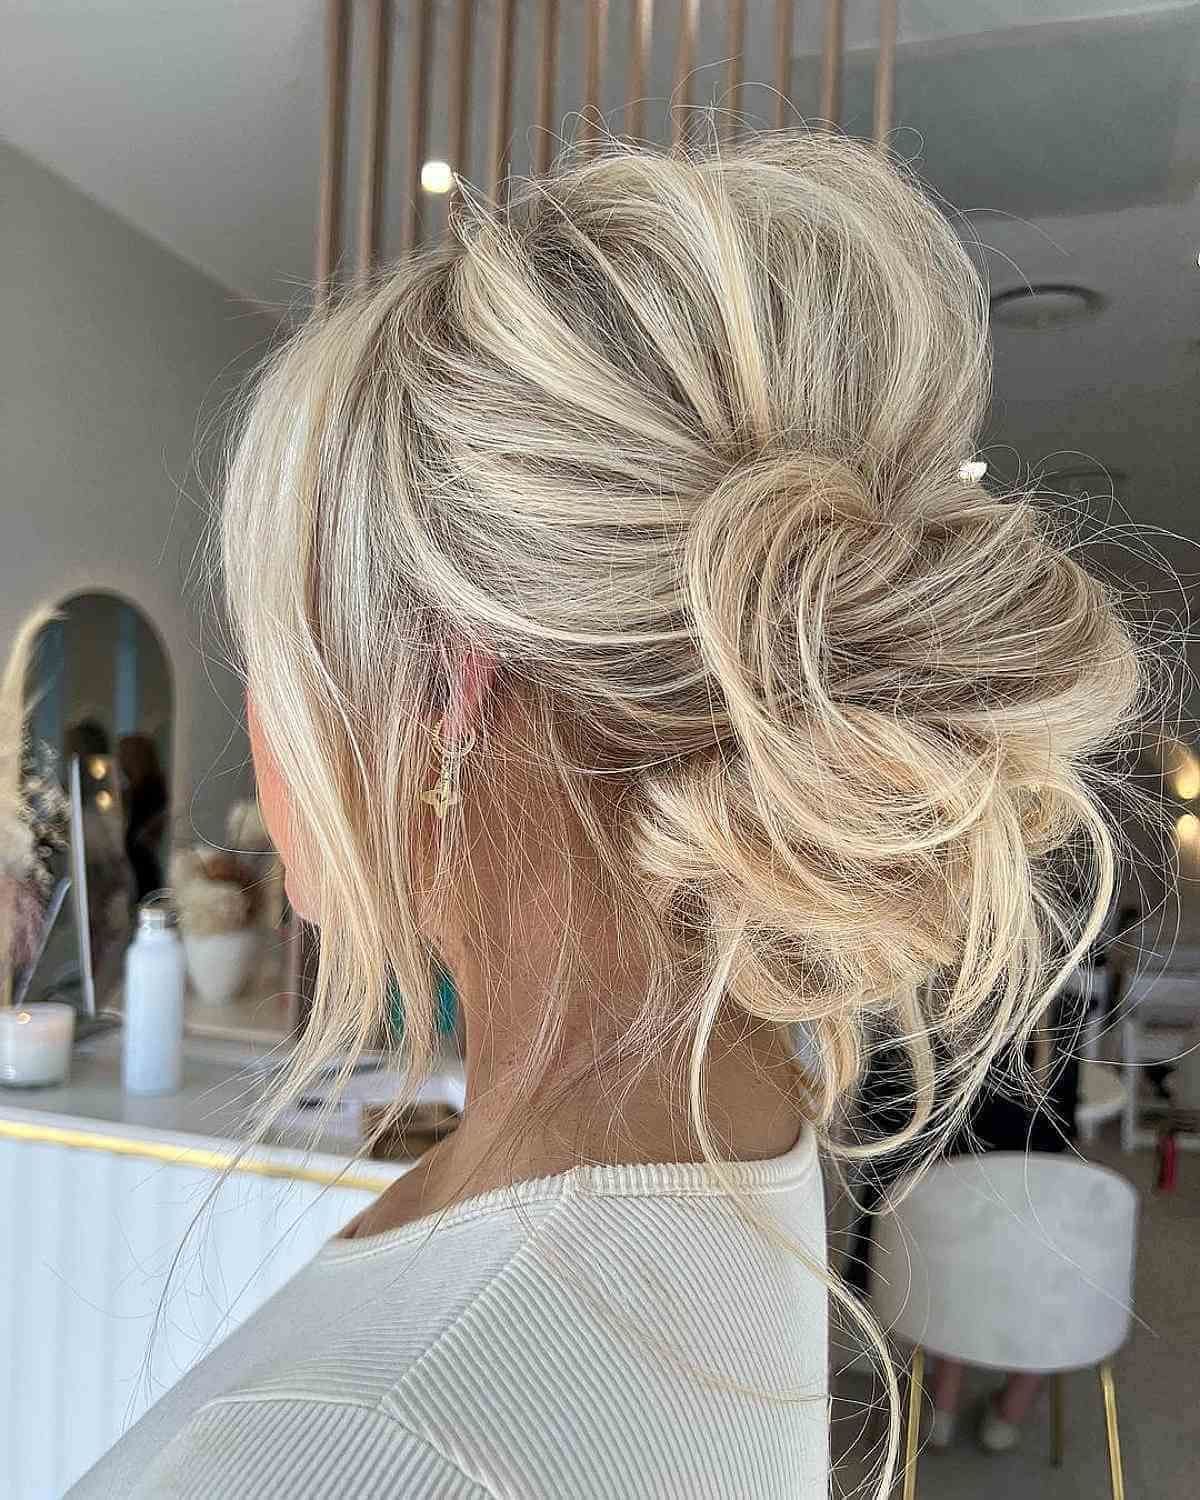 Well Liked Medium Hair Updos Hairstyles Throughout 25 Easy & Cute Updos For Medium Hair (View 13 of 20)